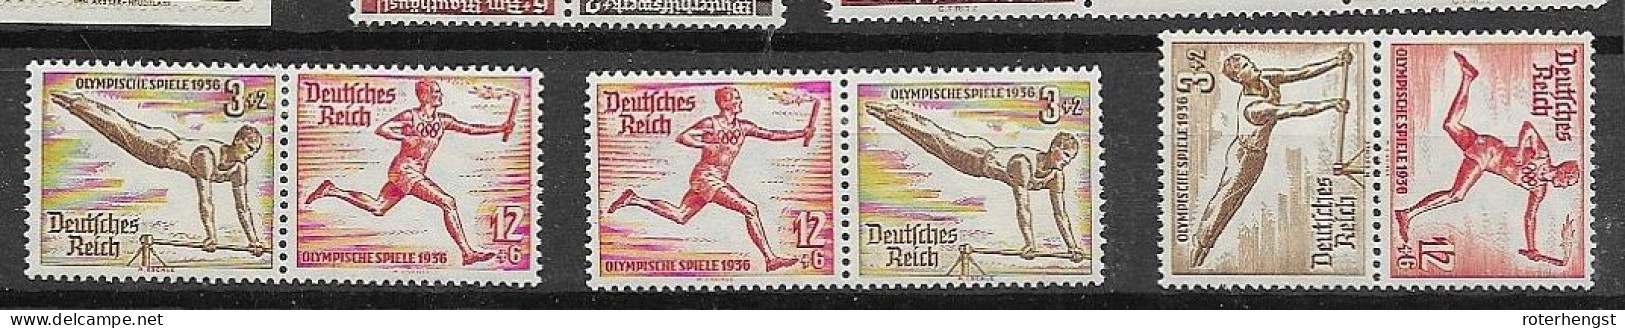 Reich From Booklet Panes 1936 Mlh *  And Mnh ** (right Better Pair) 44 Euros - Carnets